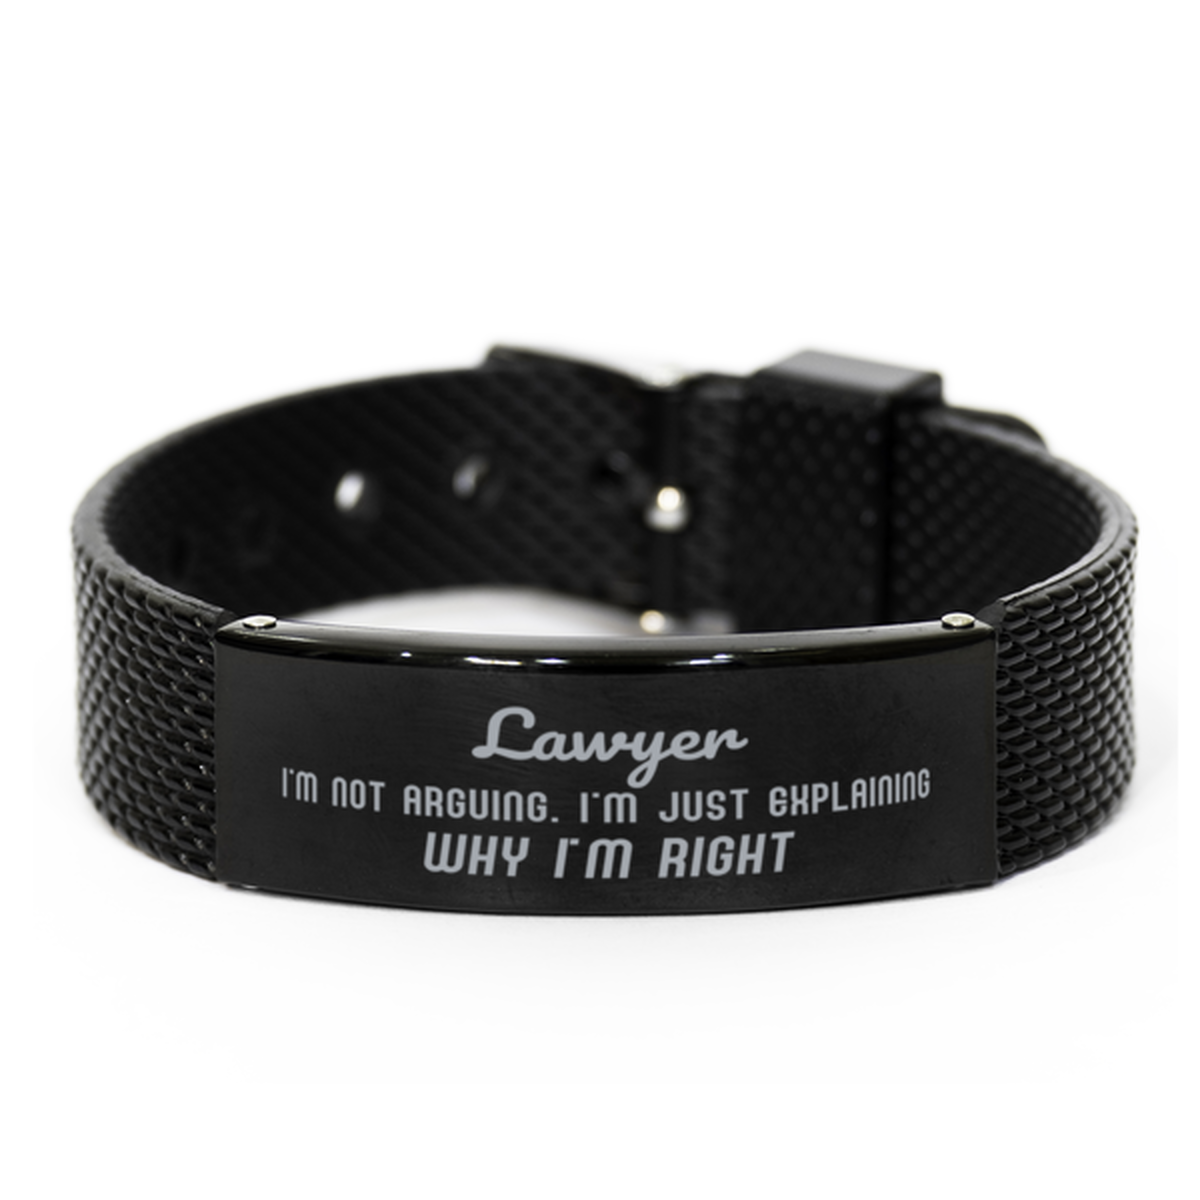 Lawyer I'm not Arguing. I'm Just Explaining Why I'm RIGHT Black Shark Mesh Bracelet, Funny Saying Quote Lawyer Gifts For Lawyer Graduation Birthday Christmas Gifts for Men Women Coworker